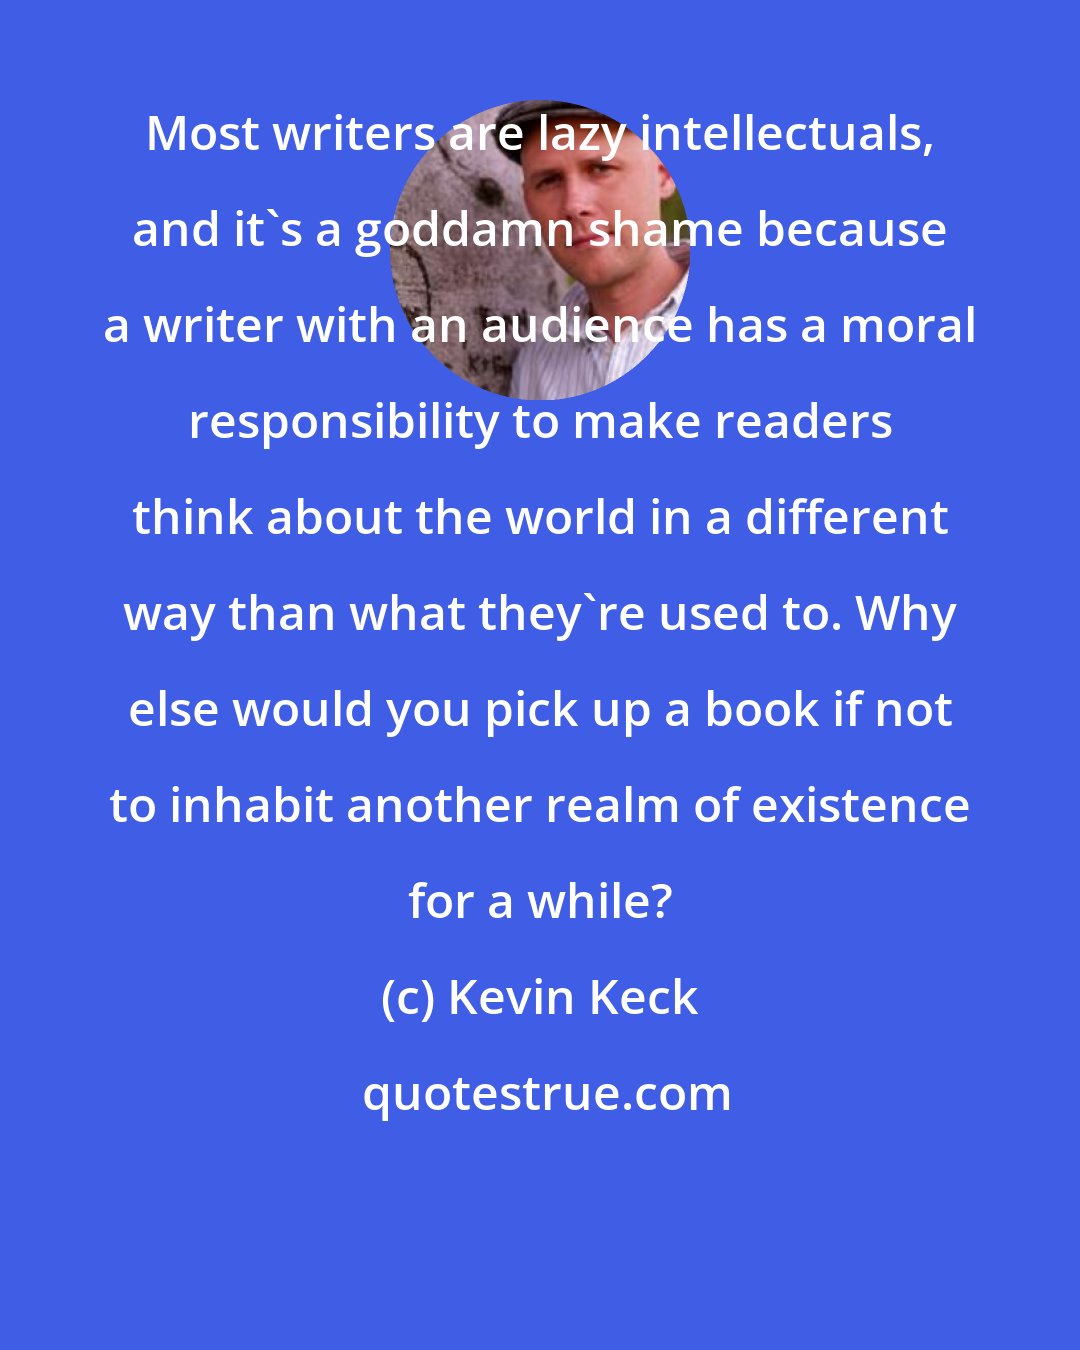 Kevin Keck: Most writers are lazy intellectuals, and it's a goddamn shame because a writer with an audience has a moral responsibility to make readers think about the world in a different way than what they're used to. Why else would you pick up a book if not to inhabit another realm of existence for a while?